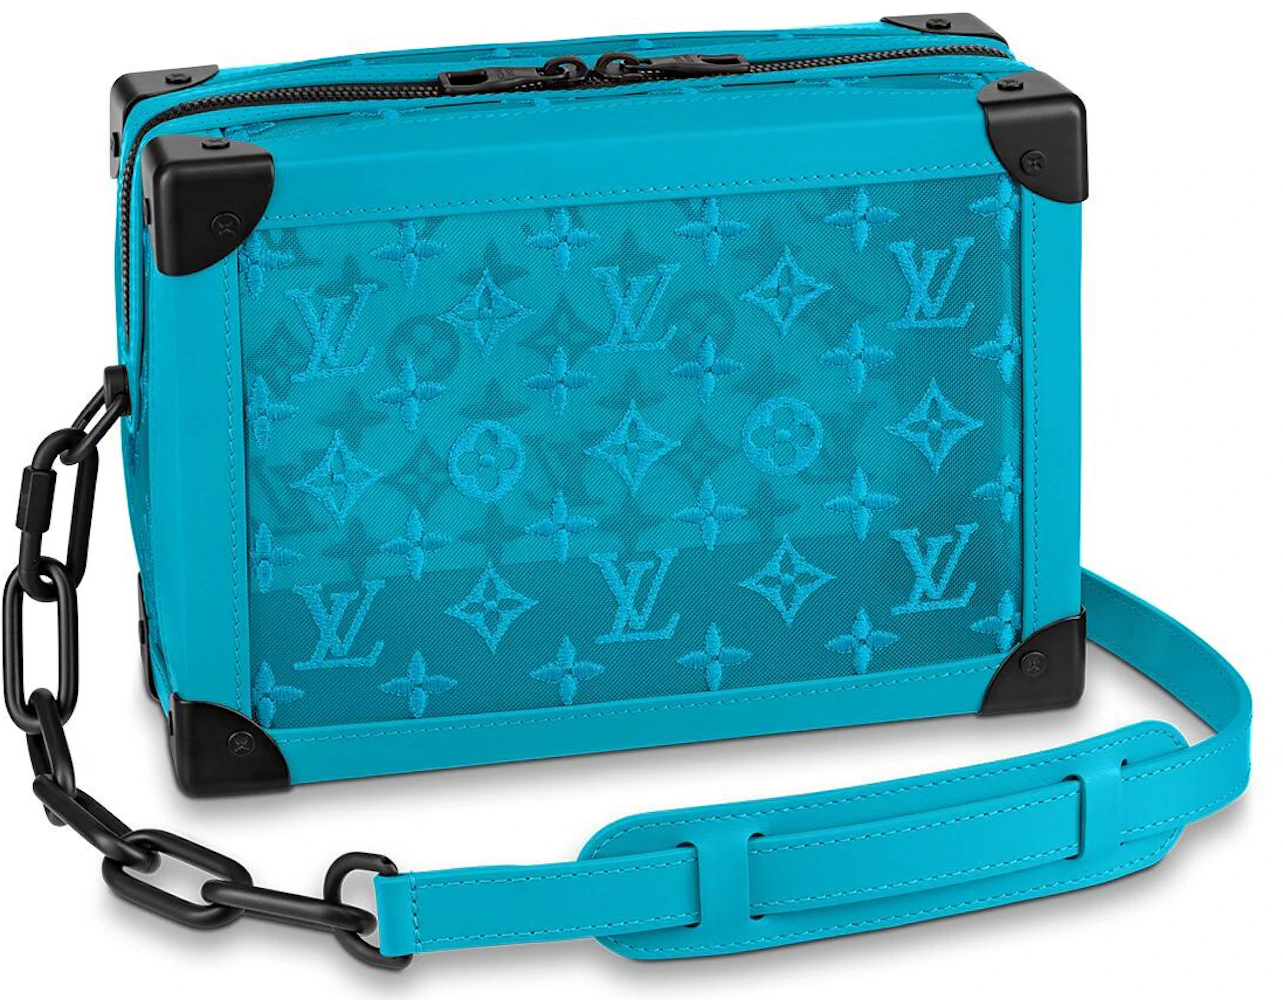 LOUIS VUITTON Monogram Tuffetage Soft Trunk Backpack PM Turquoise 849829